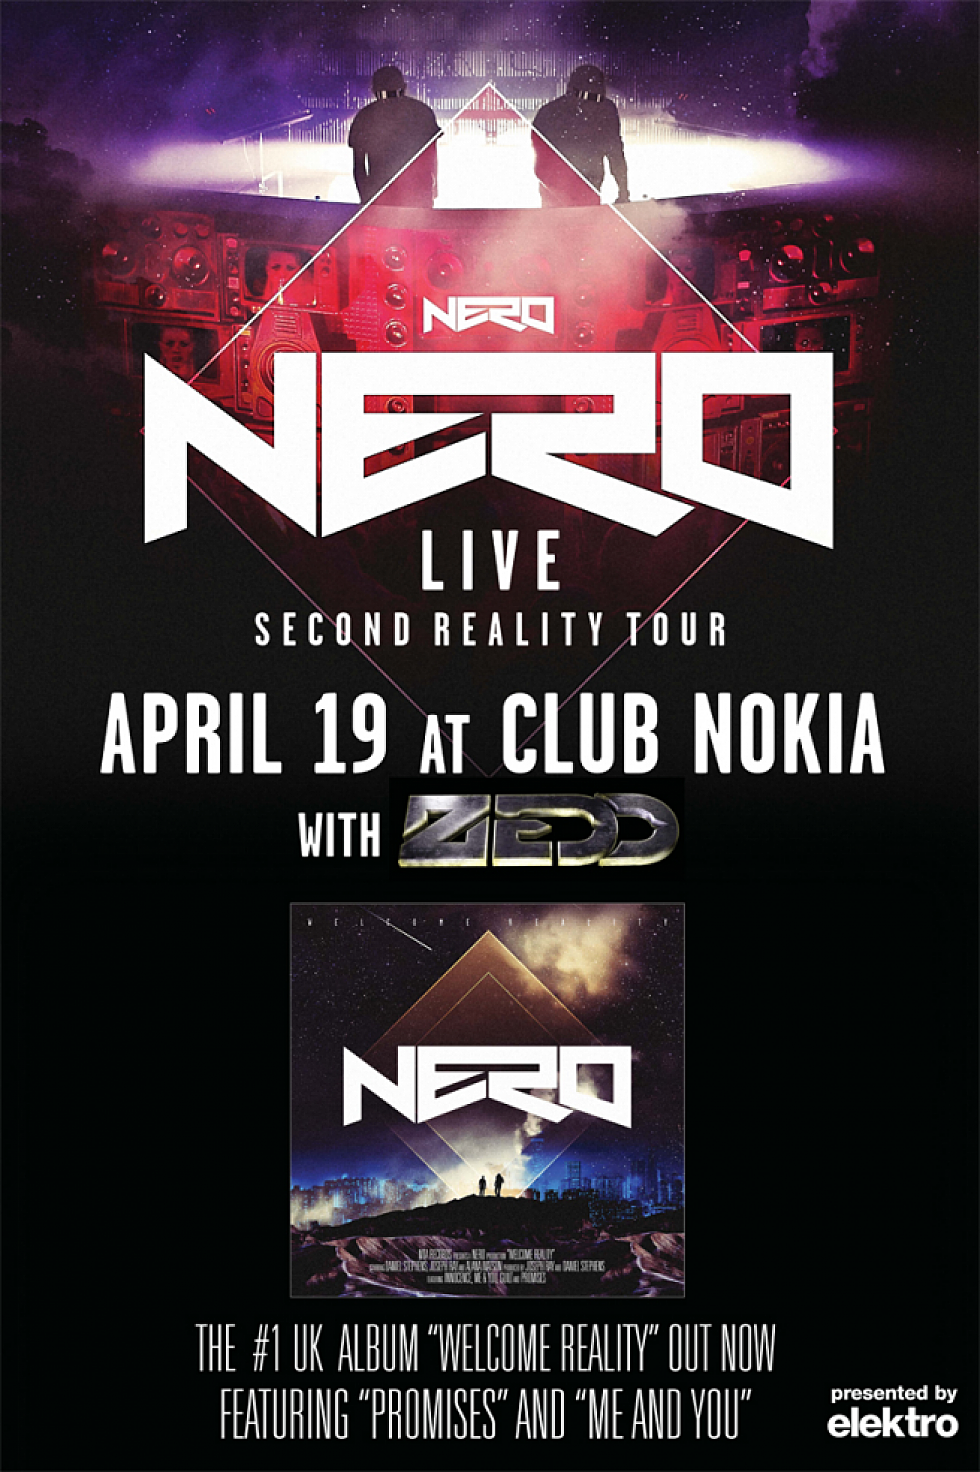 Elektro is Giving It Away: Five pairs of Tickets to Nero in Los Angeles at Club Nokia April 19th with Zedd!